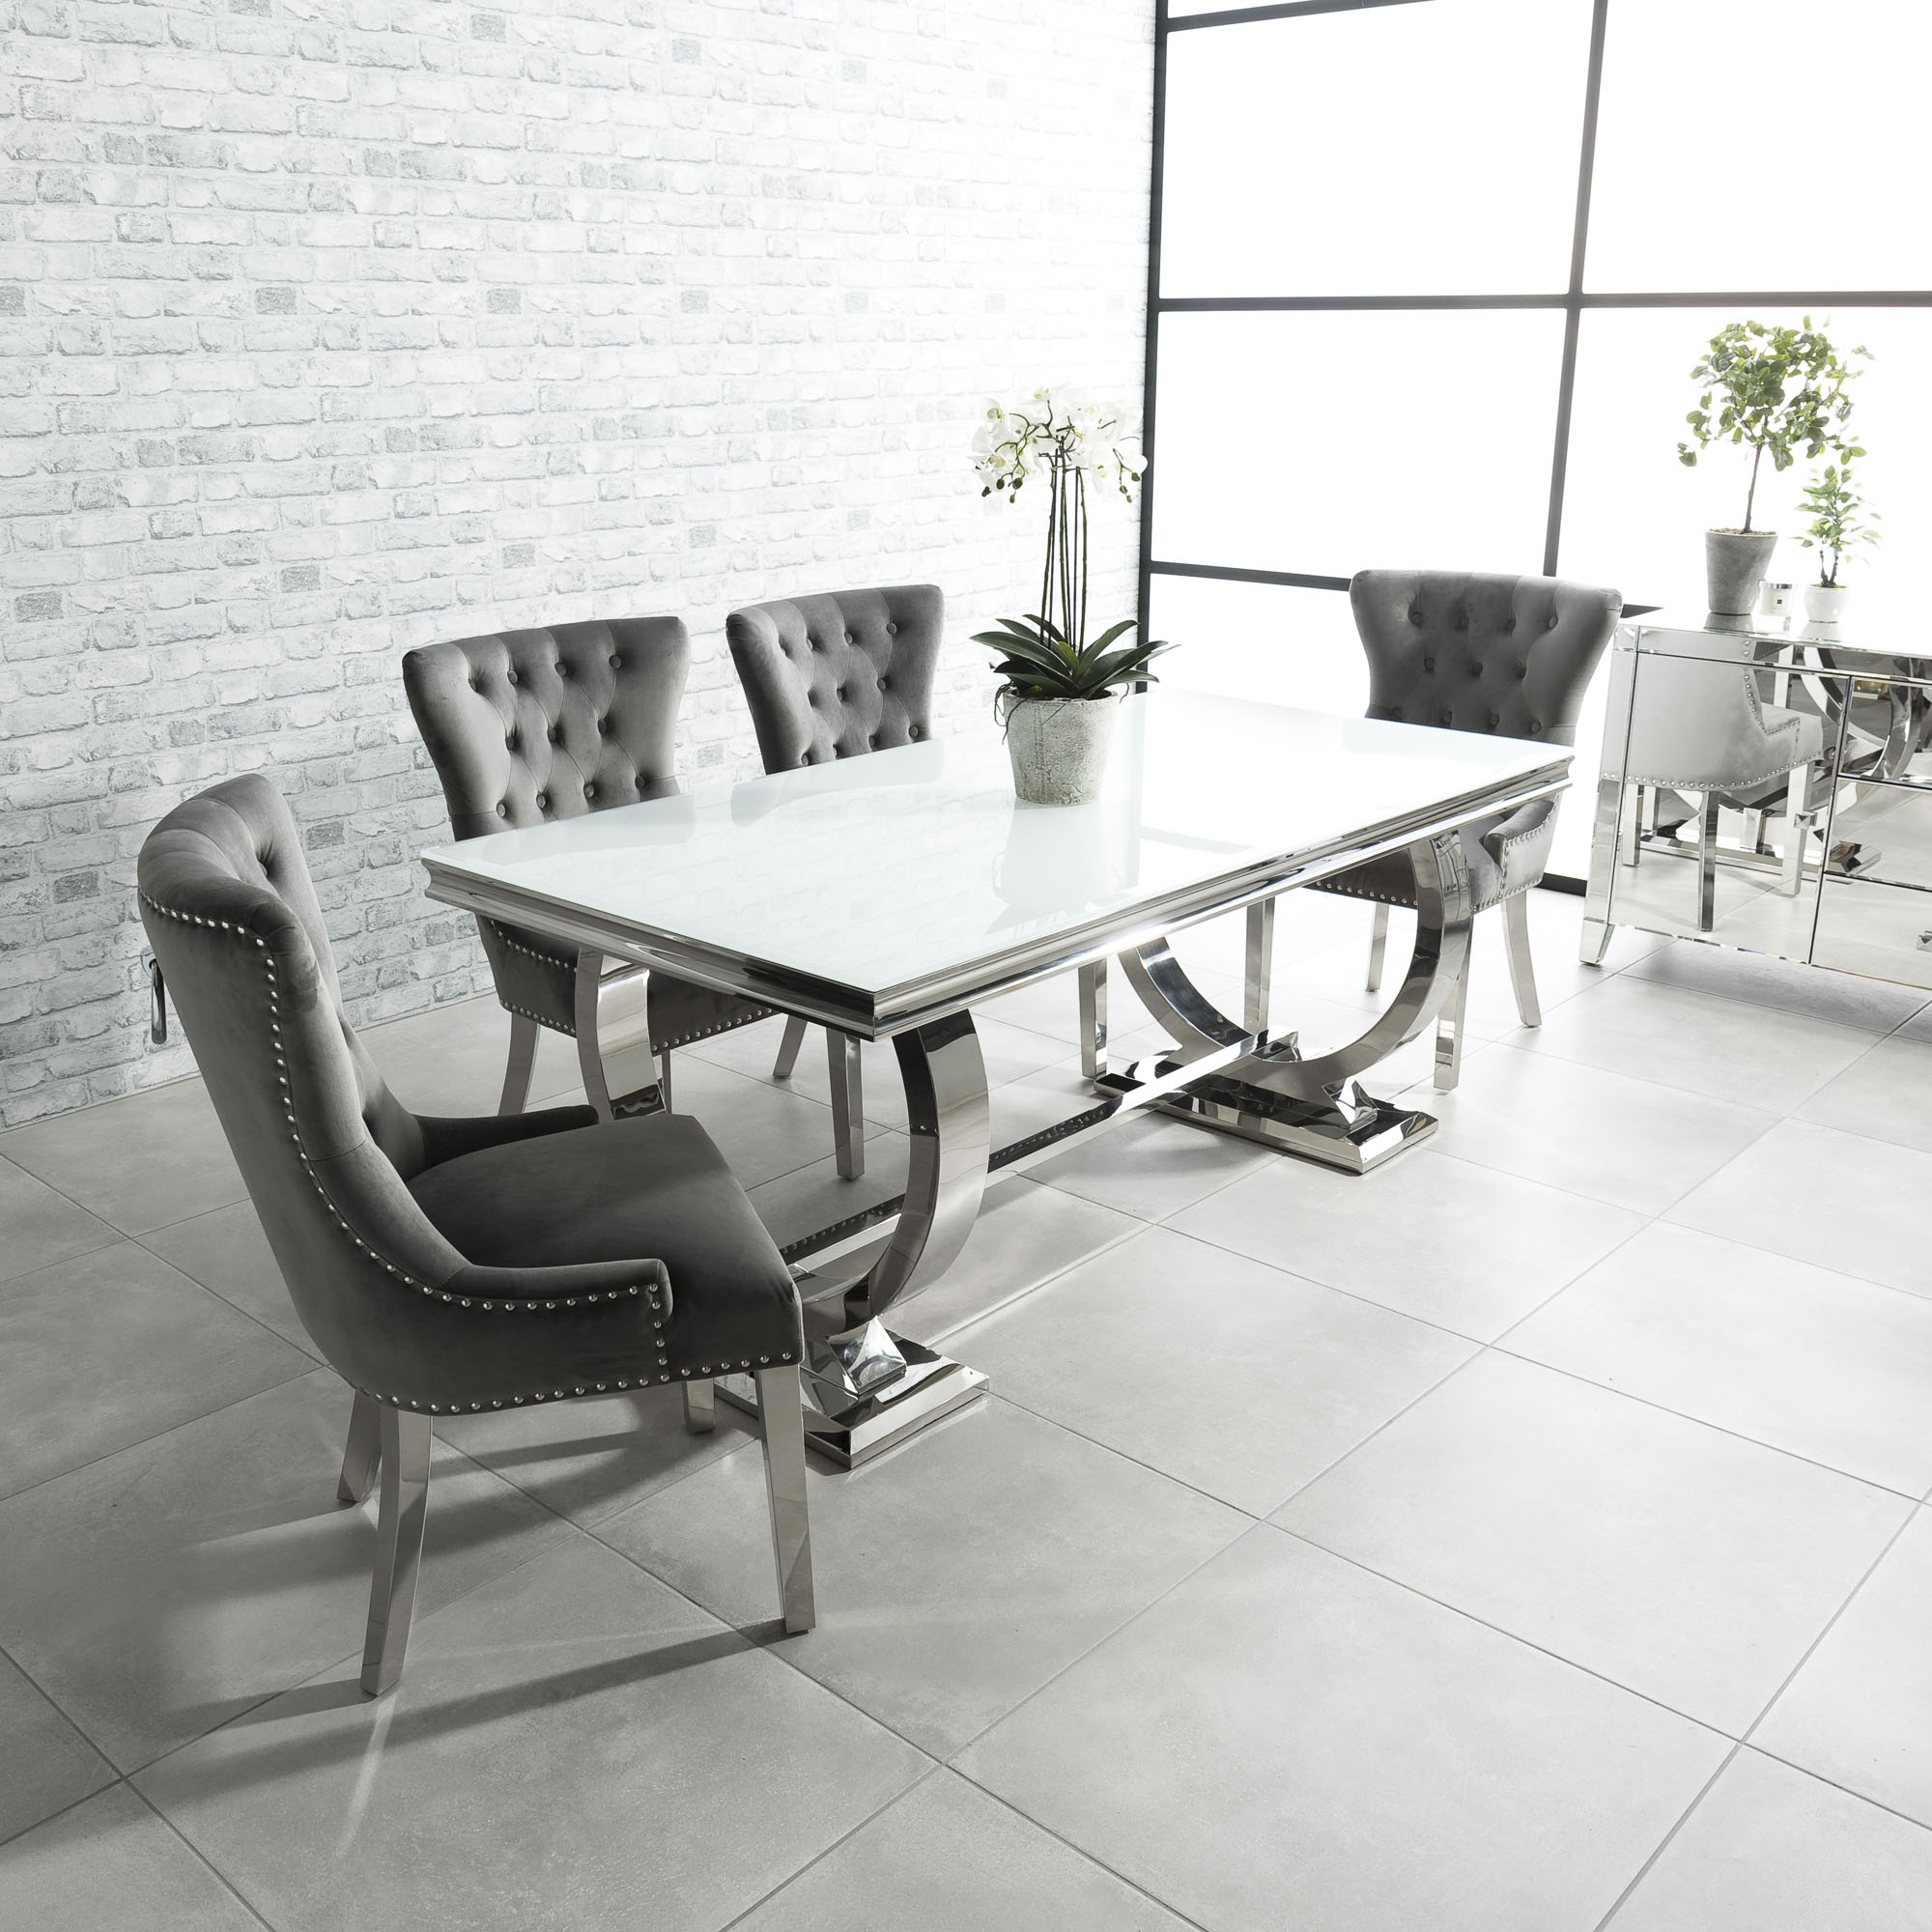 Siena 1.8m White Glass & Steel Dining Table with 4 Grey Brushed Velvet Dining Chairs